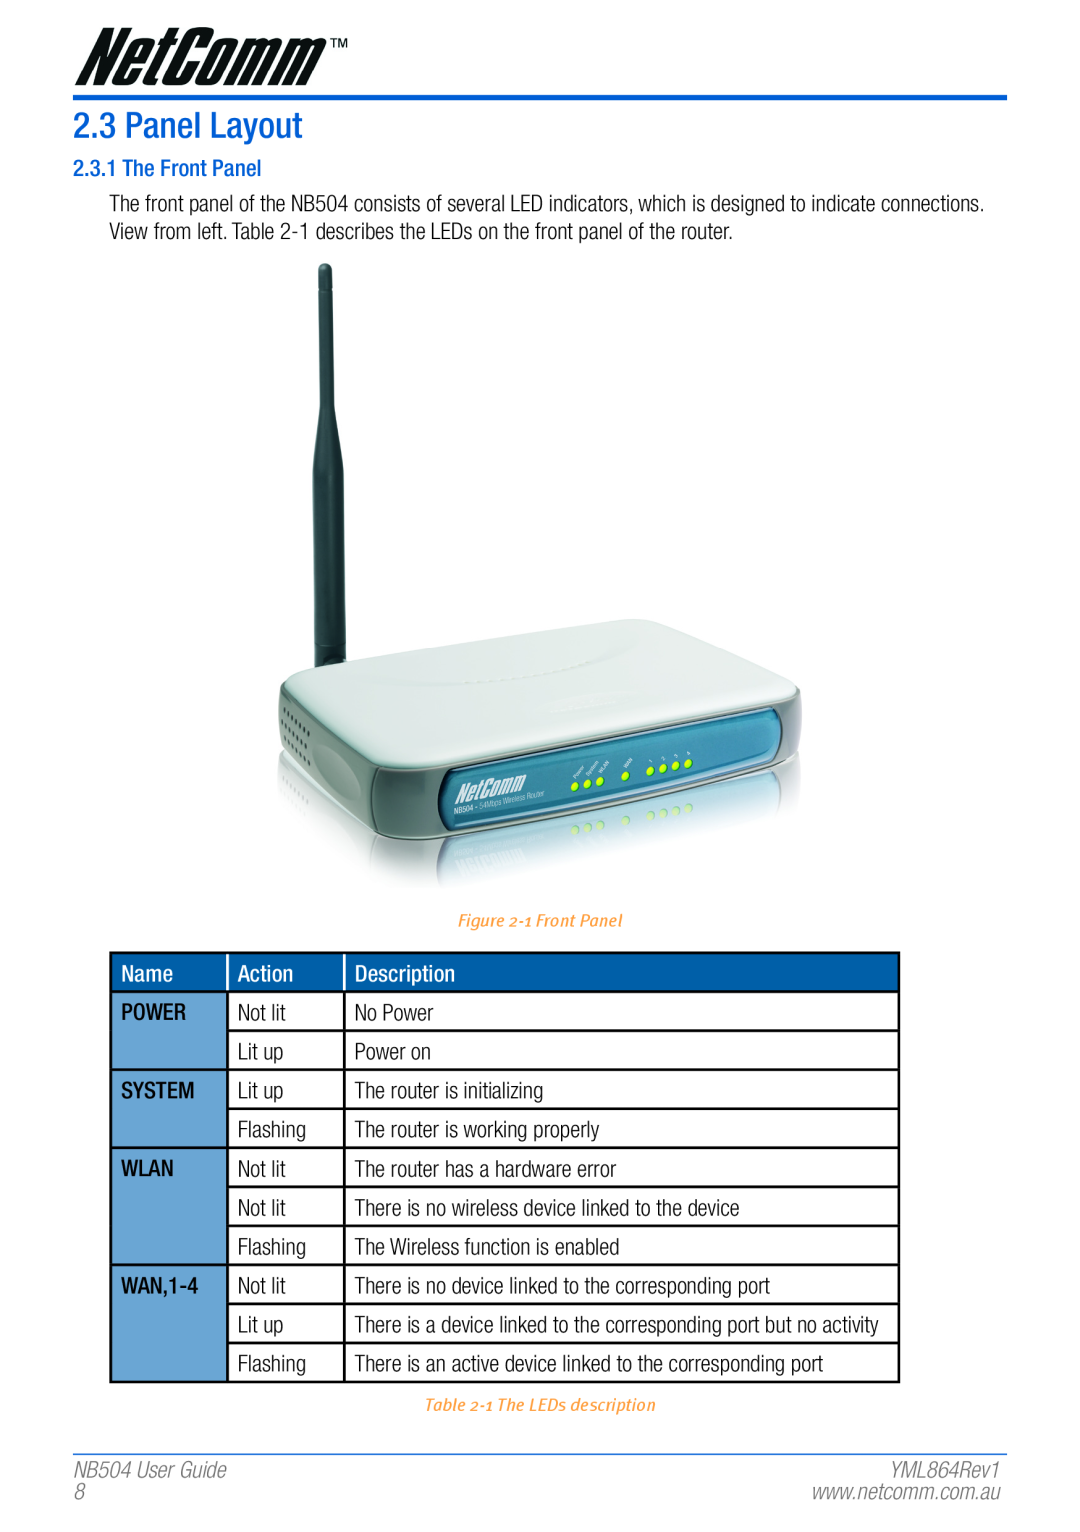 NetComm manual Panel Layout, The Front Panel, Name, Action, Description, NB504 User Guide 